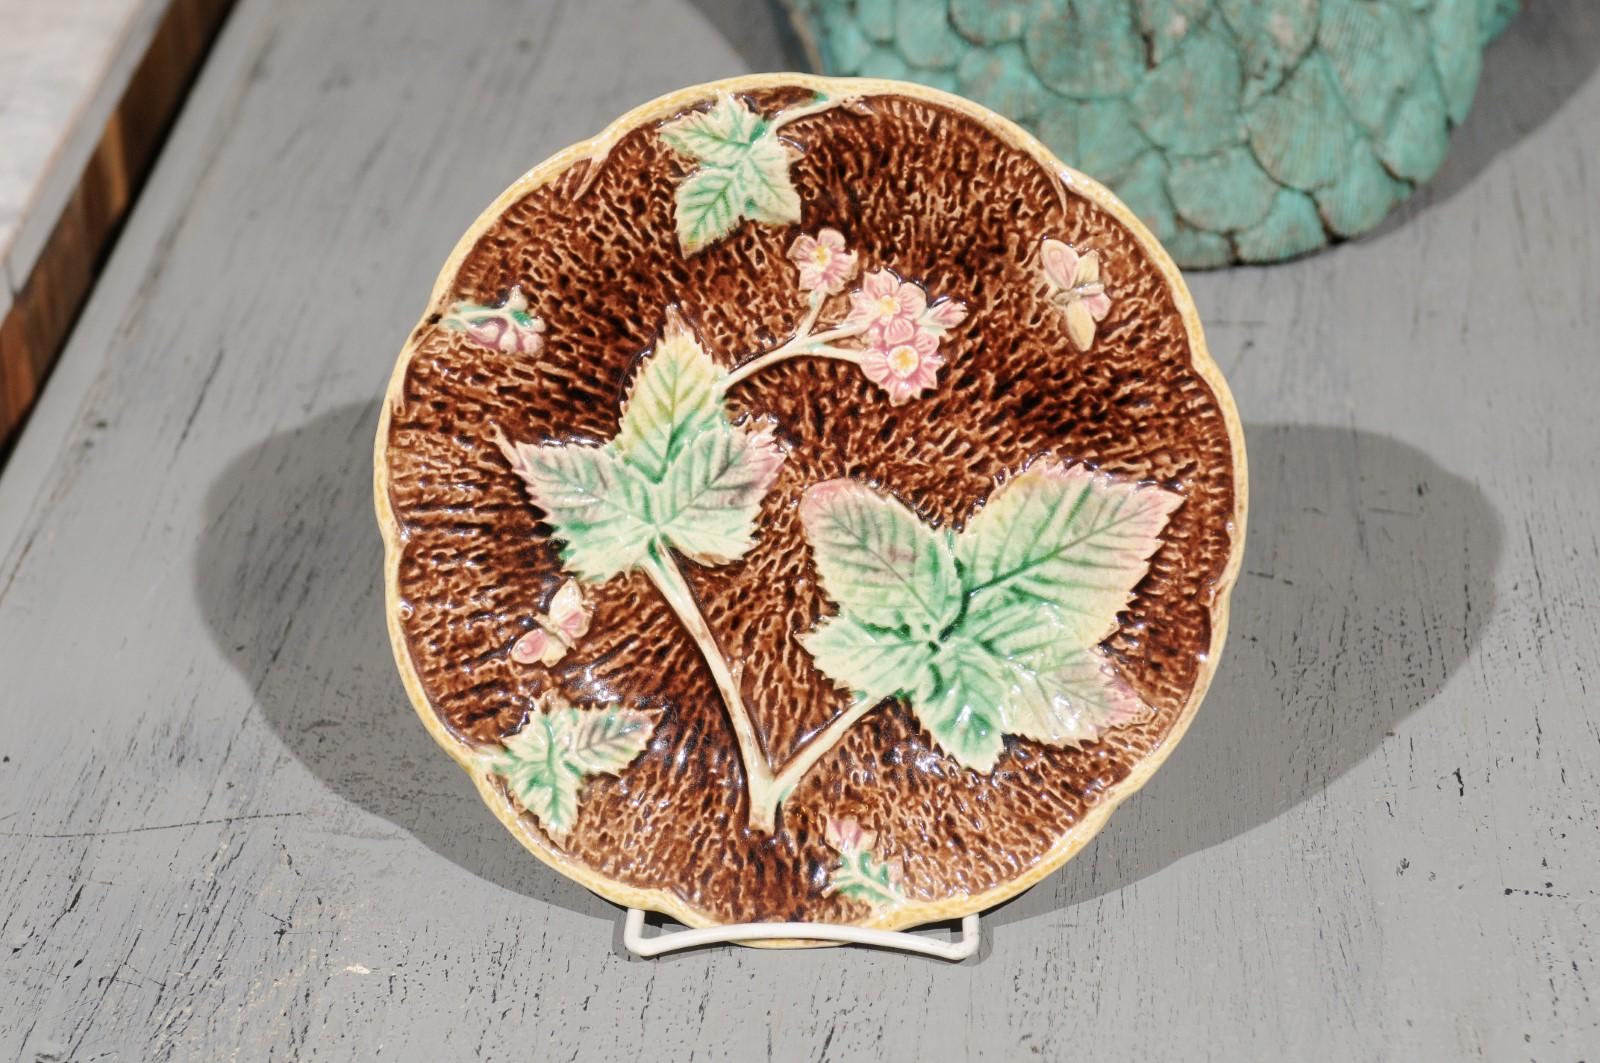 A French Majolica strawberries, flowers and butterfly plate from the mid-19th century. Born in France during the third quarter of the 19th century, this lovely Majolica plate features a delicate décor of green leaves, pink flowers, wild strawberries